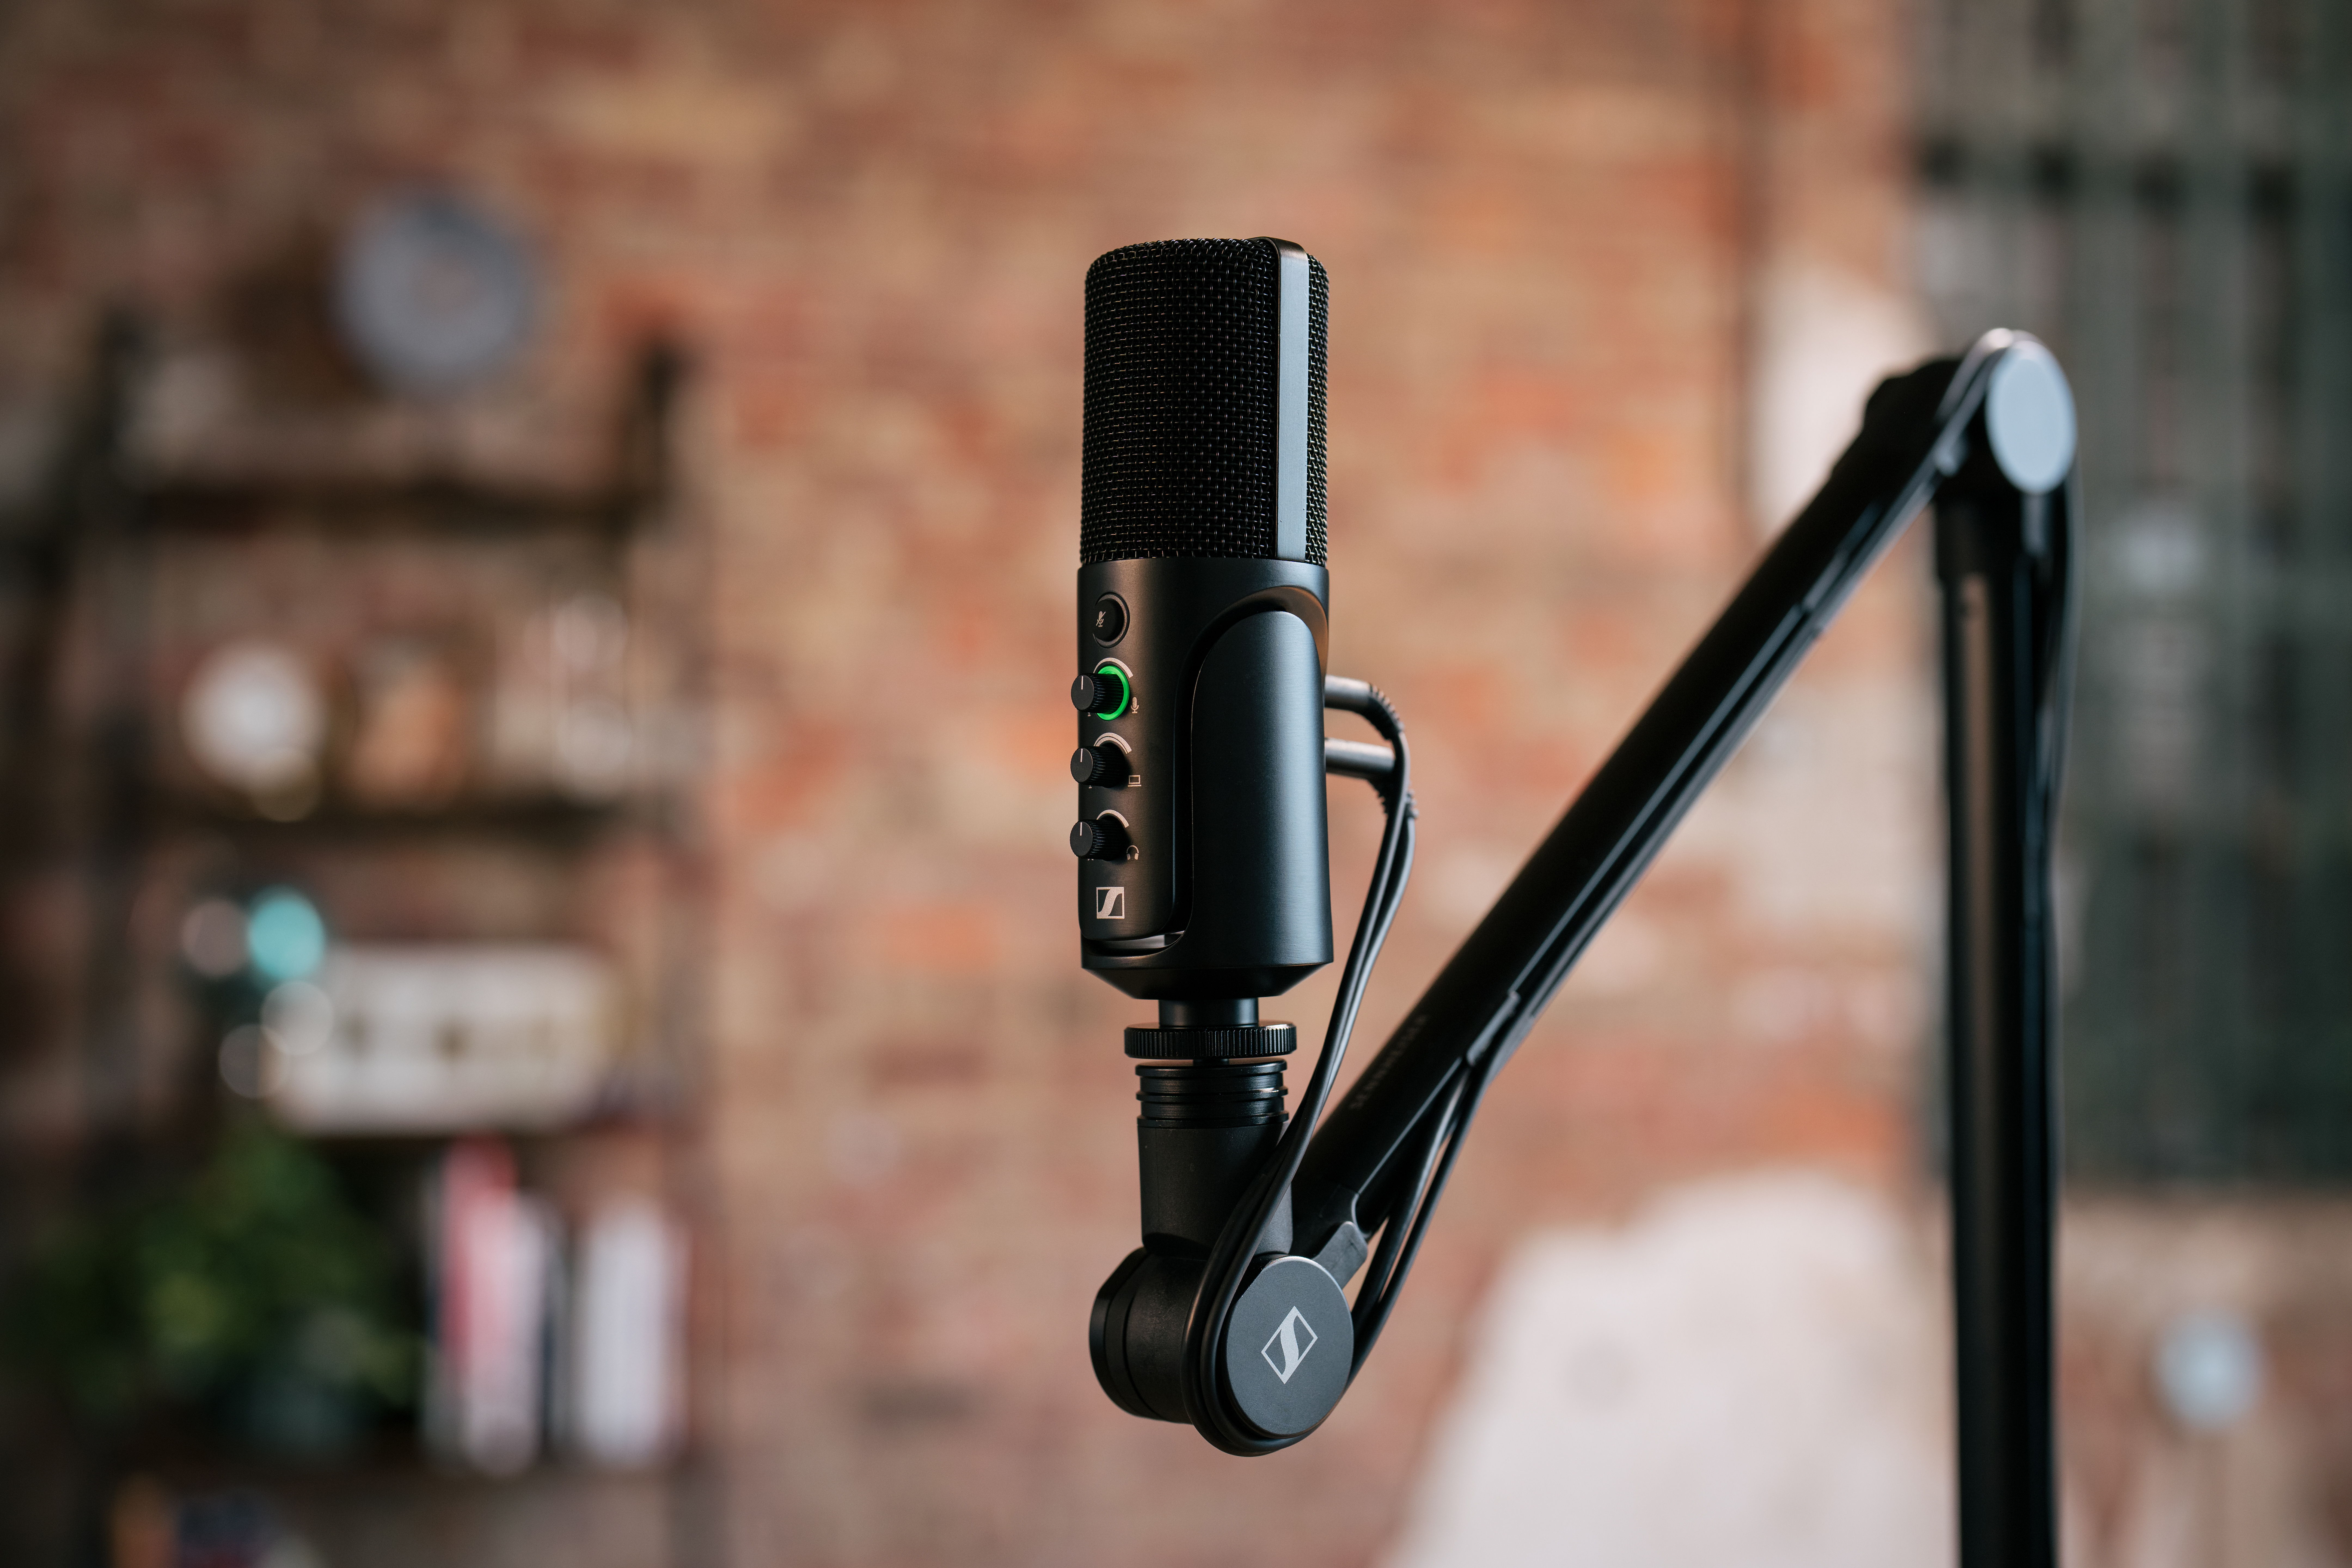 Sennheiser’s new plug-and-play solution for podcasters, streamers and creators, the Profile USB Mic will be on display at SXSW Sydney.